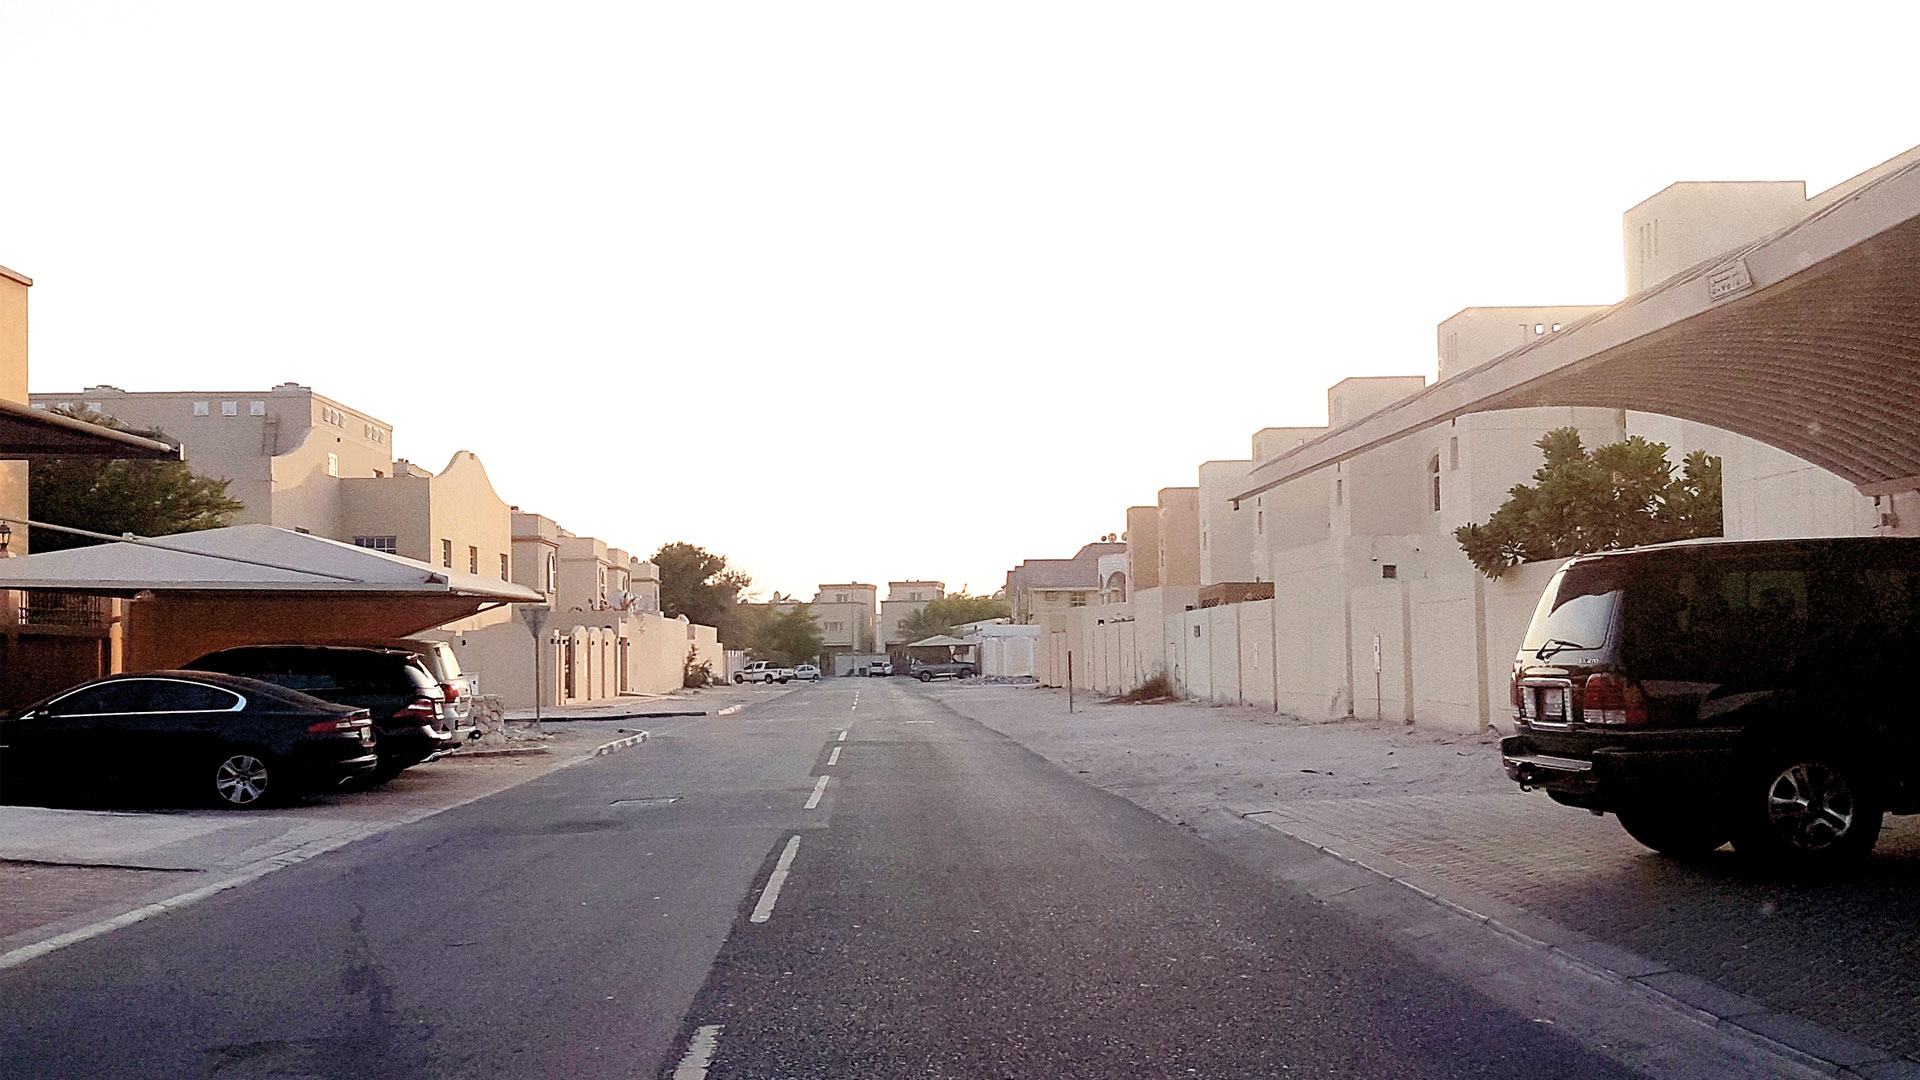 Lighting is required for the vital streets of Abu Hamour